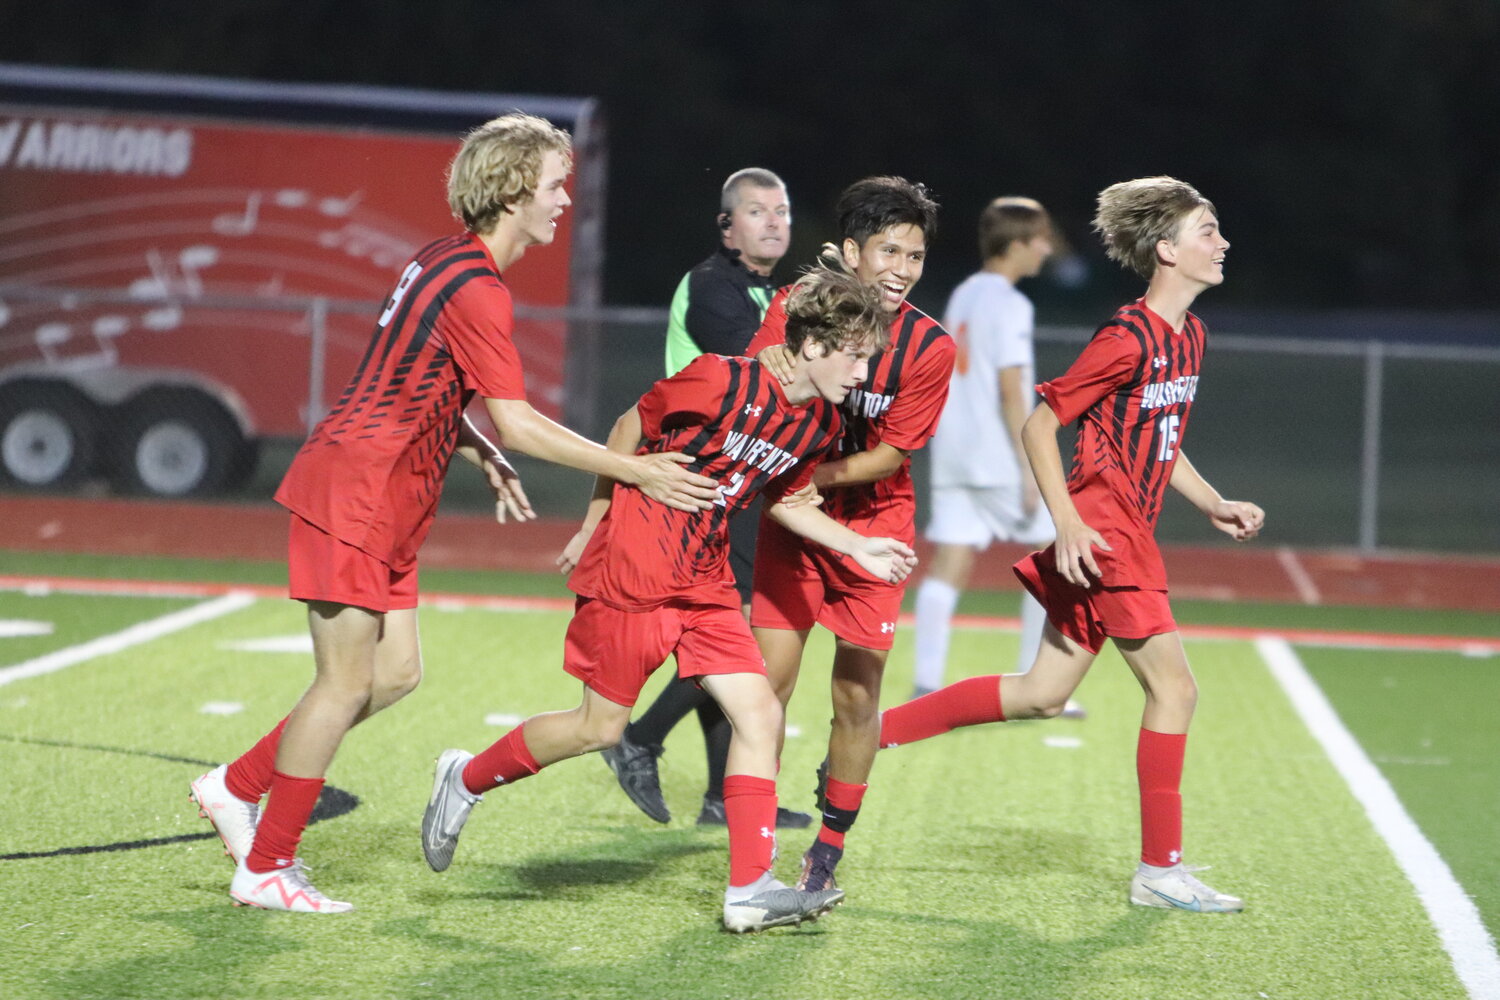 Warrenton’s Nolan Donovan (second from left) and Bryan Guerrero (right) celebrate after Donovan scored a goal in the second half of Warrenton’s 3-2 home loss to North Point last week.